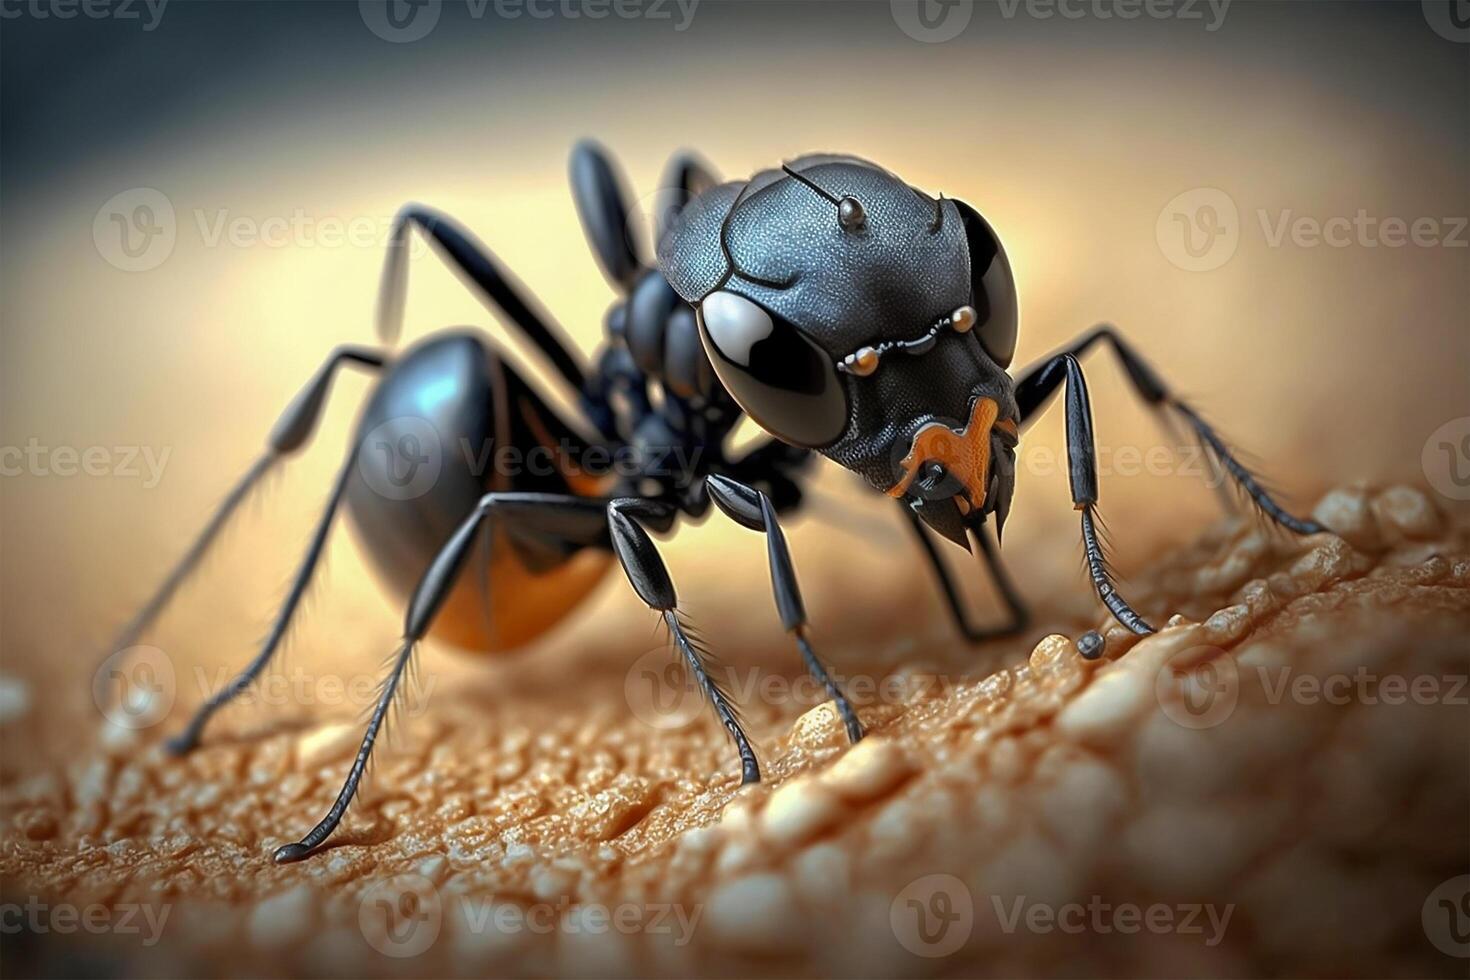 Close up black ant on the yellow sand surface with defocused macro background. illustration. photo